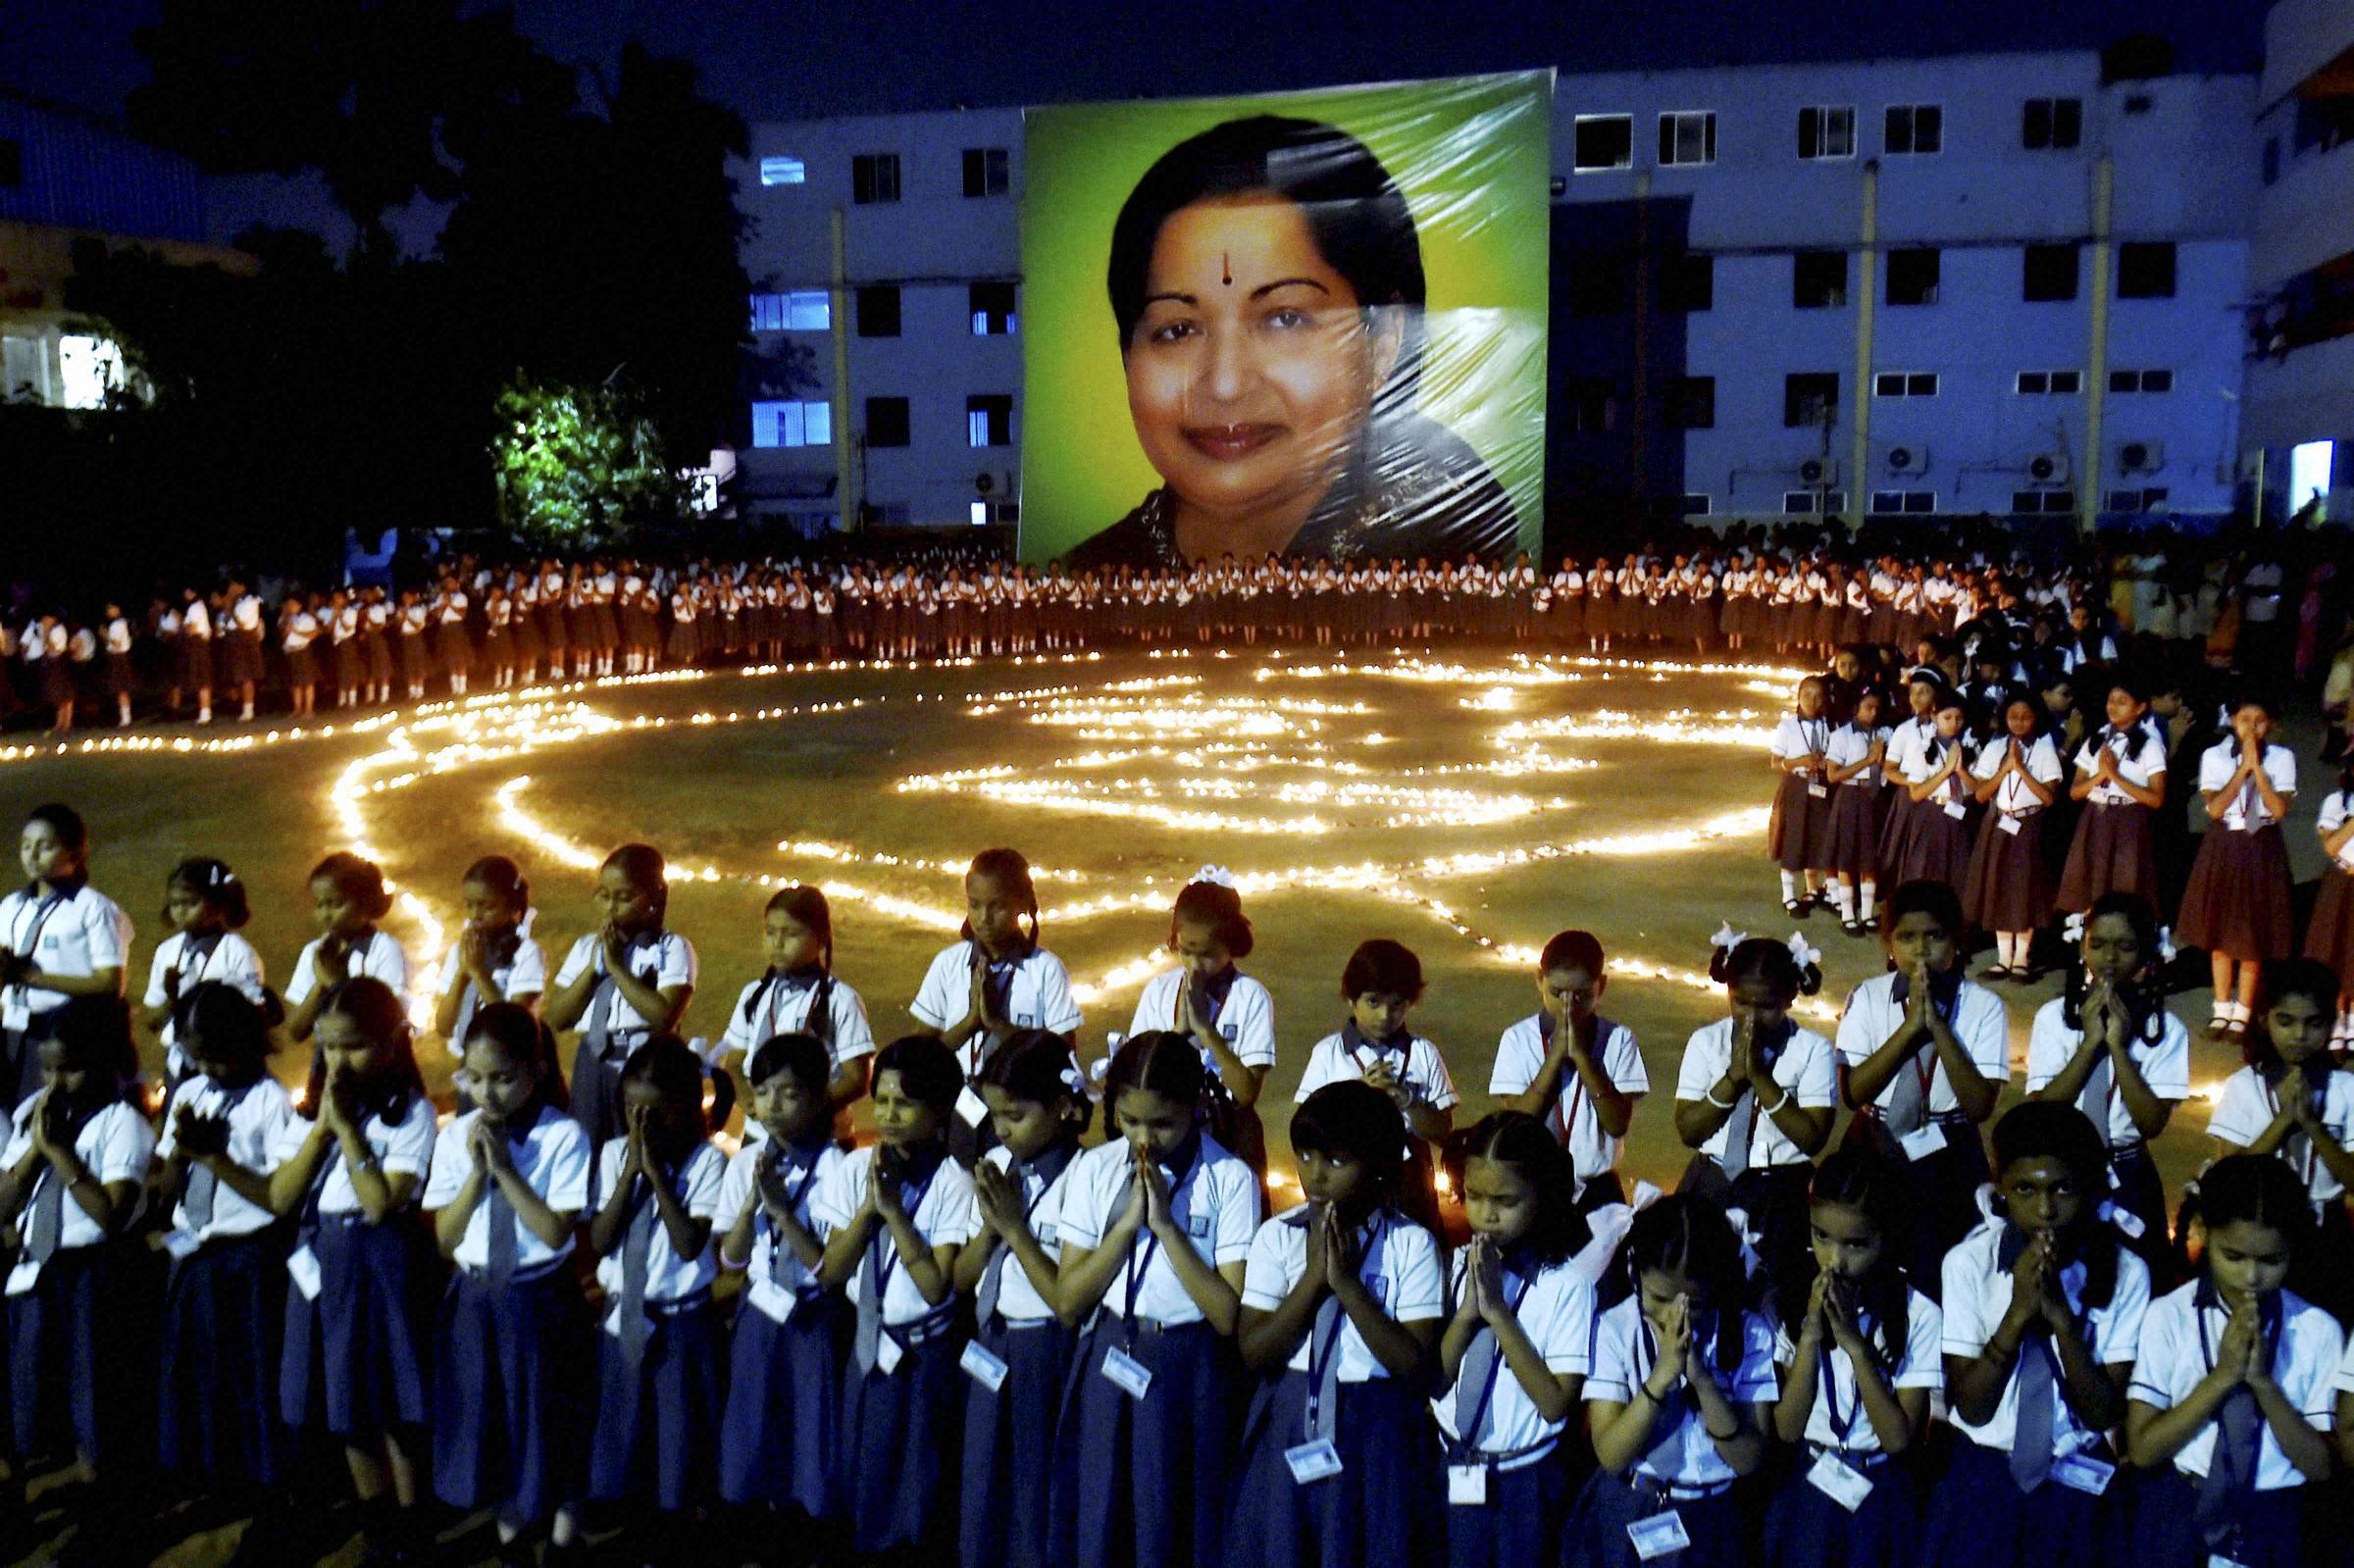 470 died of shock over Jayalalithaa's demise